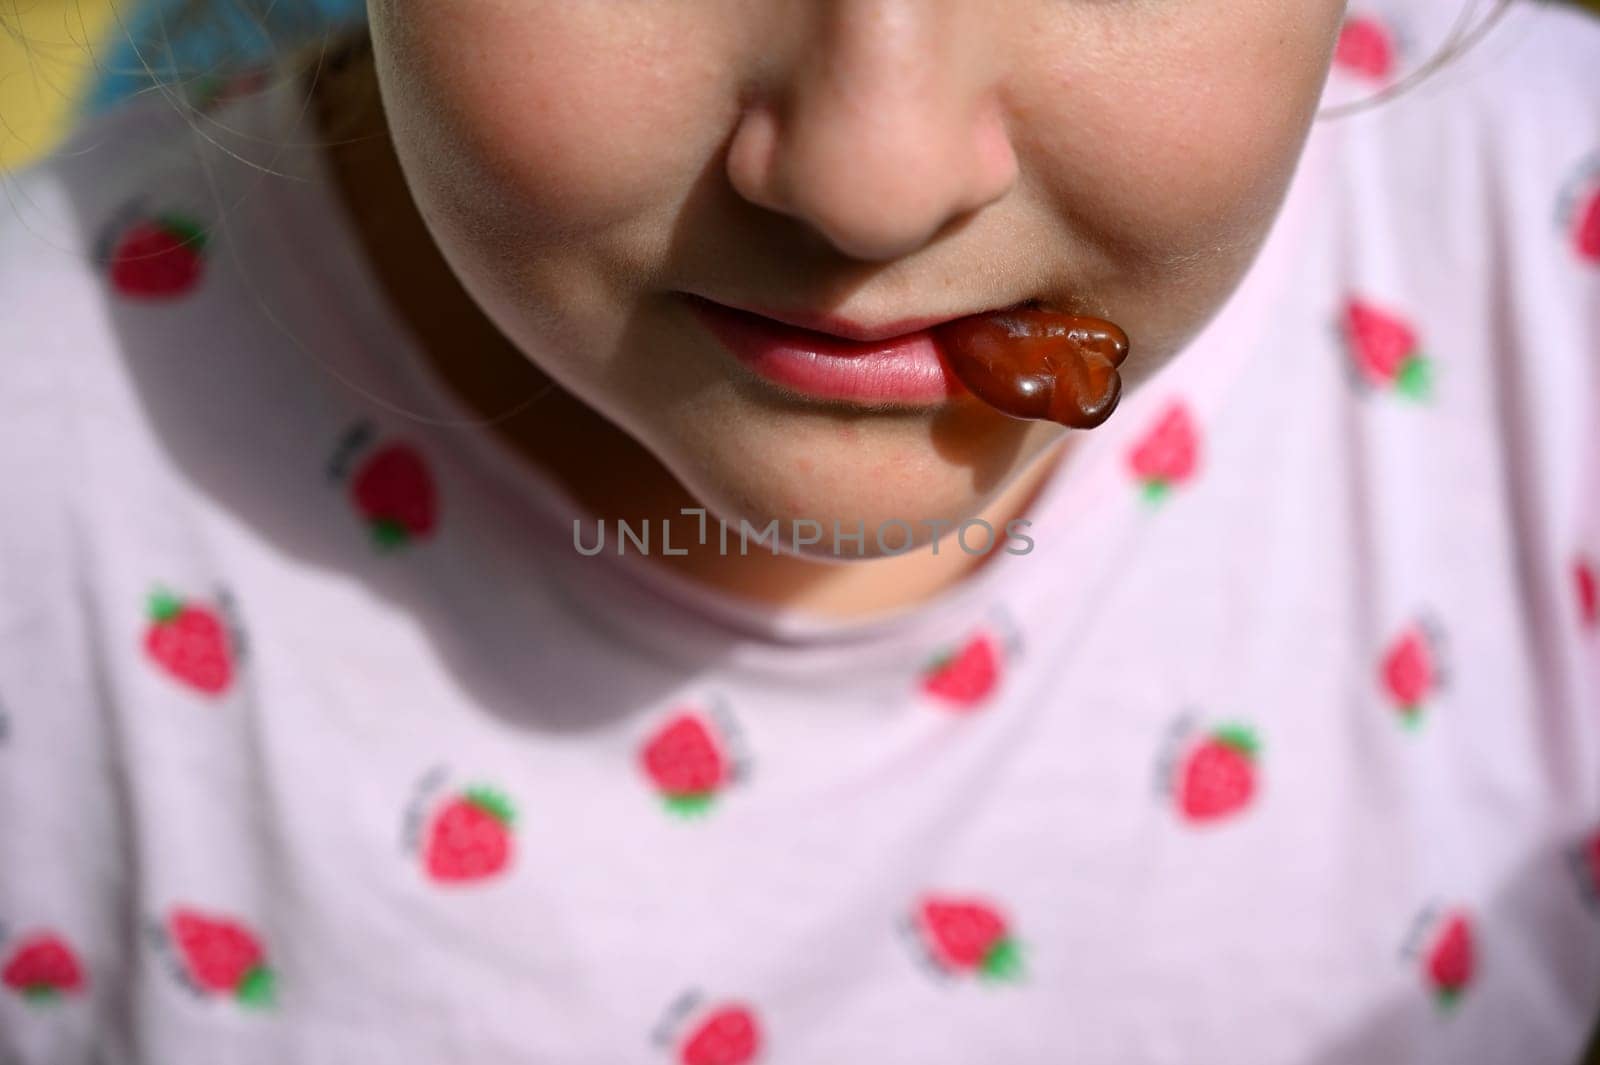 Young girl - child eating candy and sweets. Detail of face and mouth. Concept for healthy lifestyle - healthy - unhealthy sweet food and sugar. by Montypeter